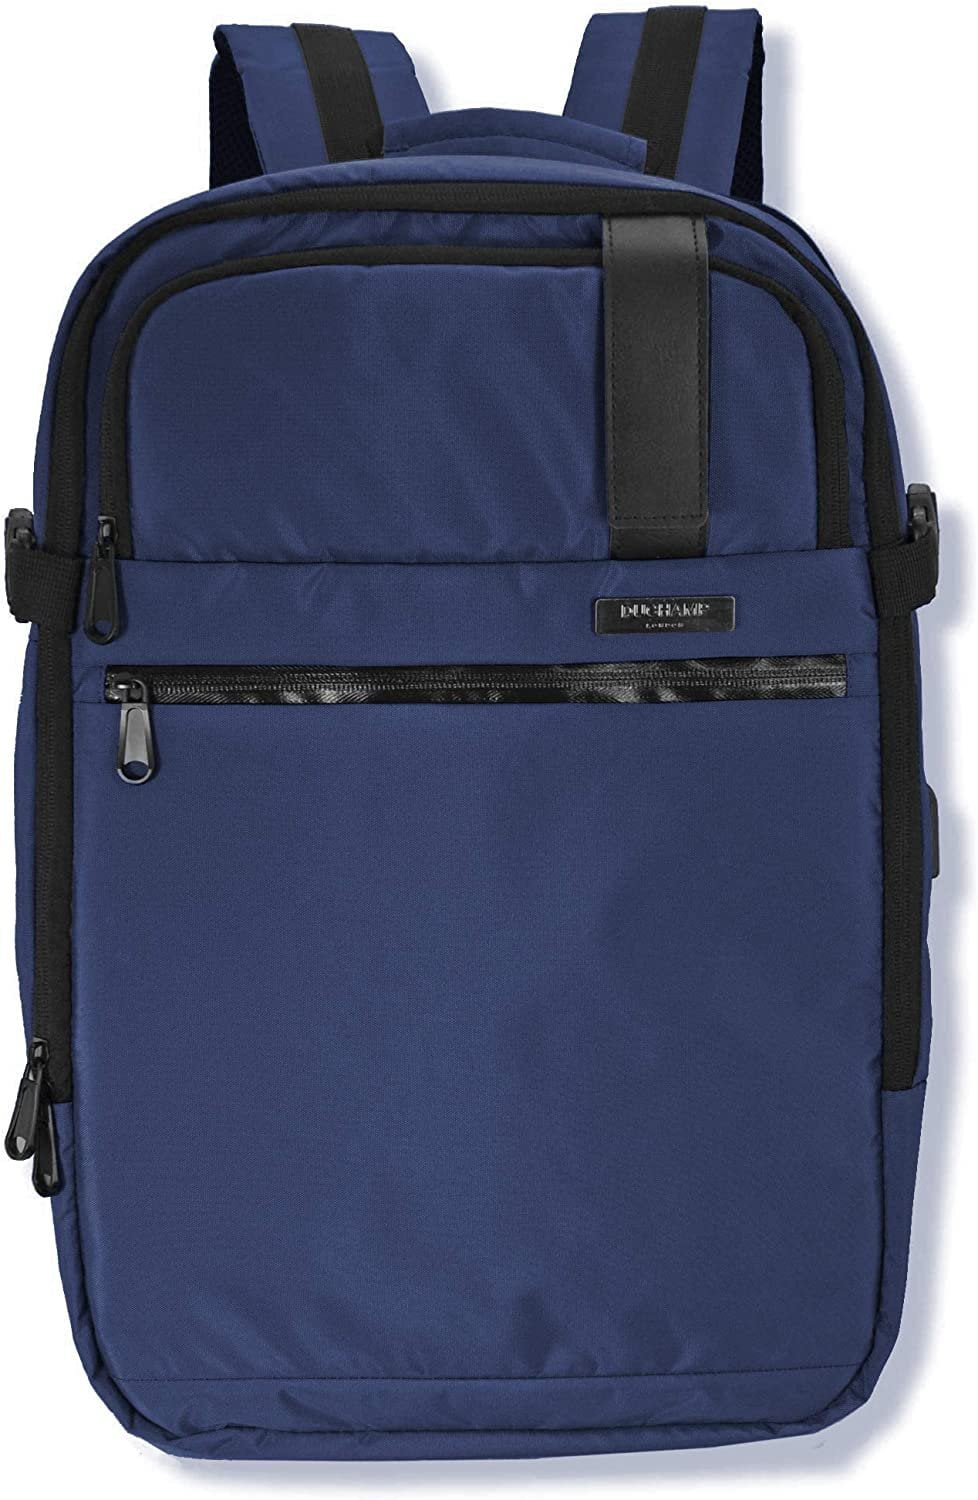 Duchamp Getaway Expandable Carry-On Backpack Suitcase Navy - Walmart.com